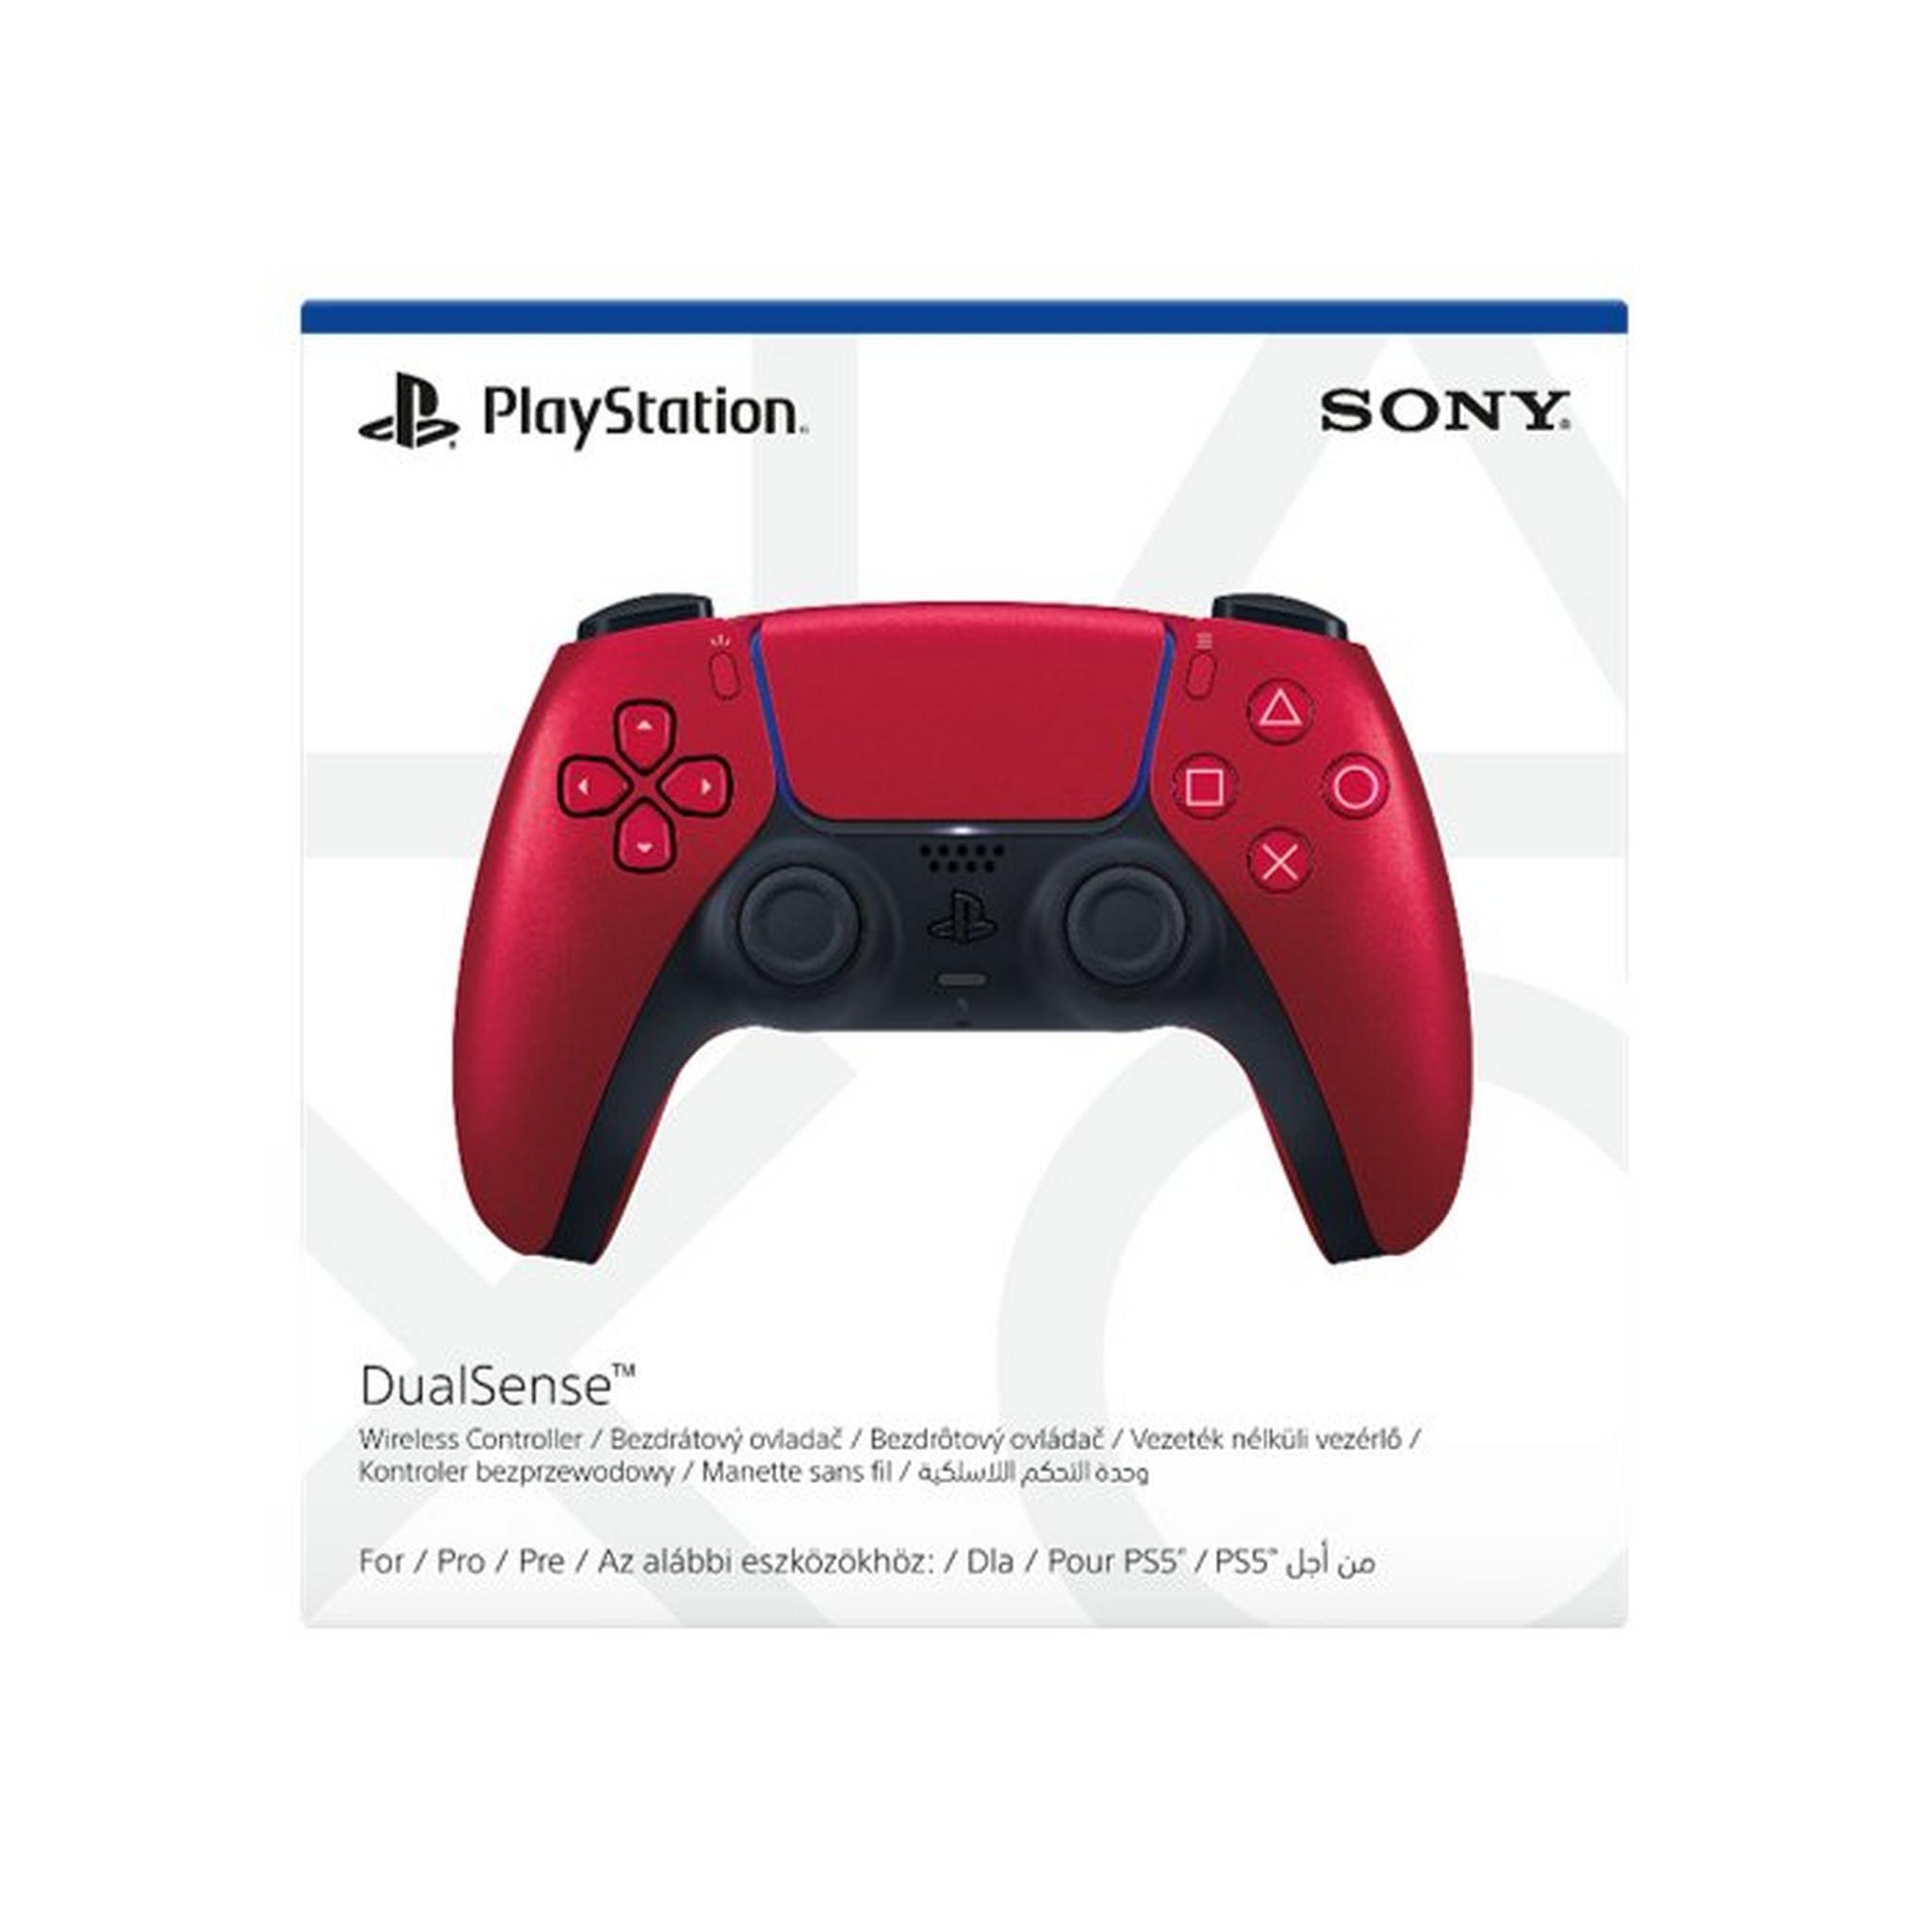 SONY Playstation 5 Dualsense Wireless Controller, CFI-ZCT1W07X - Volcanic Red